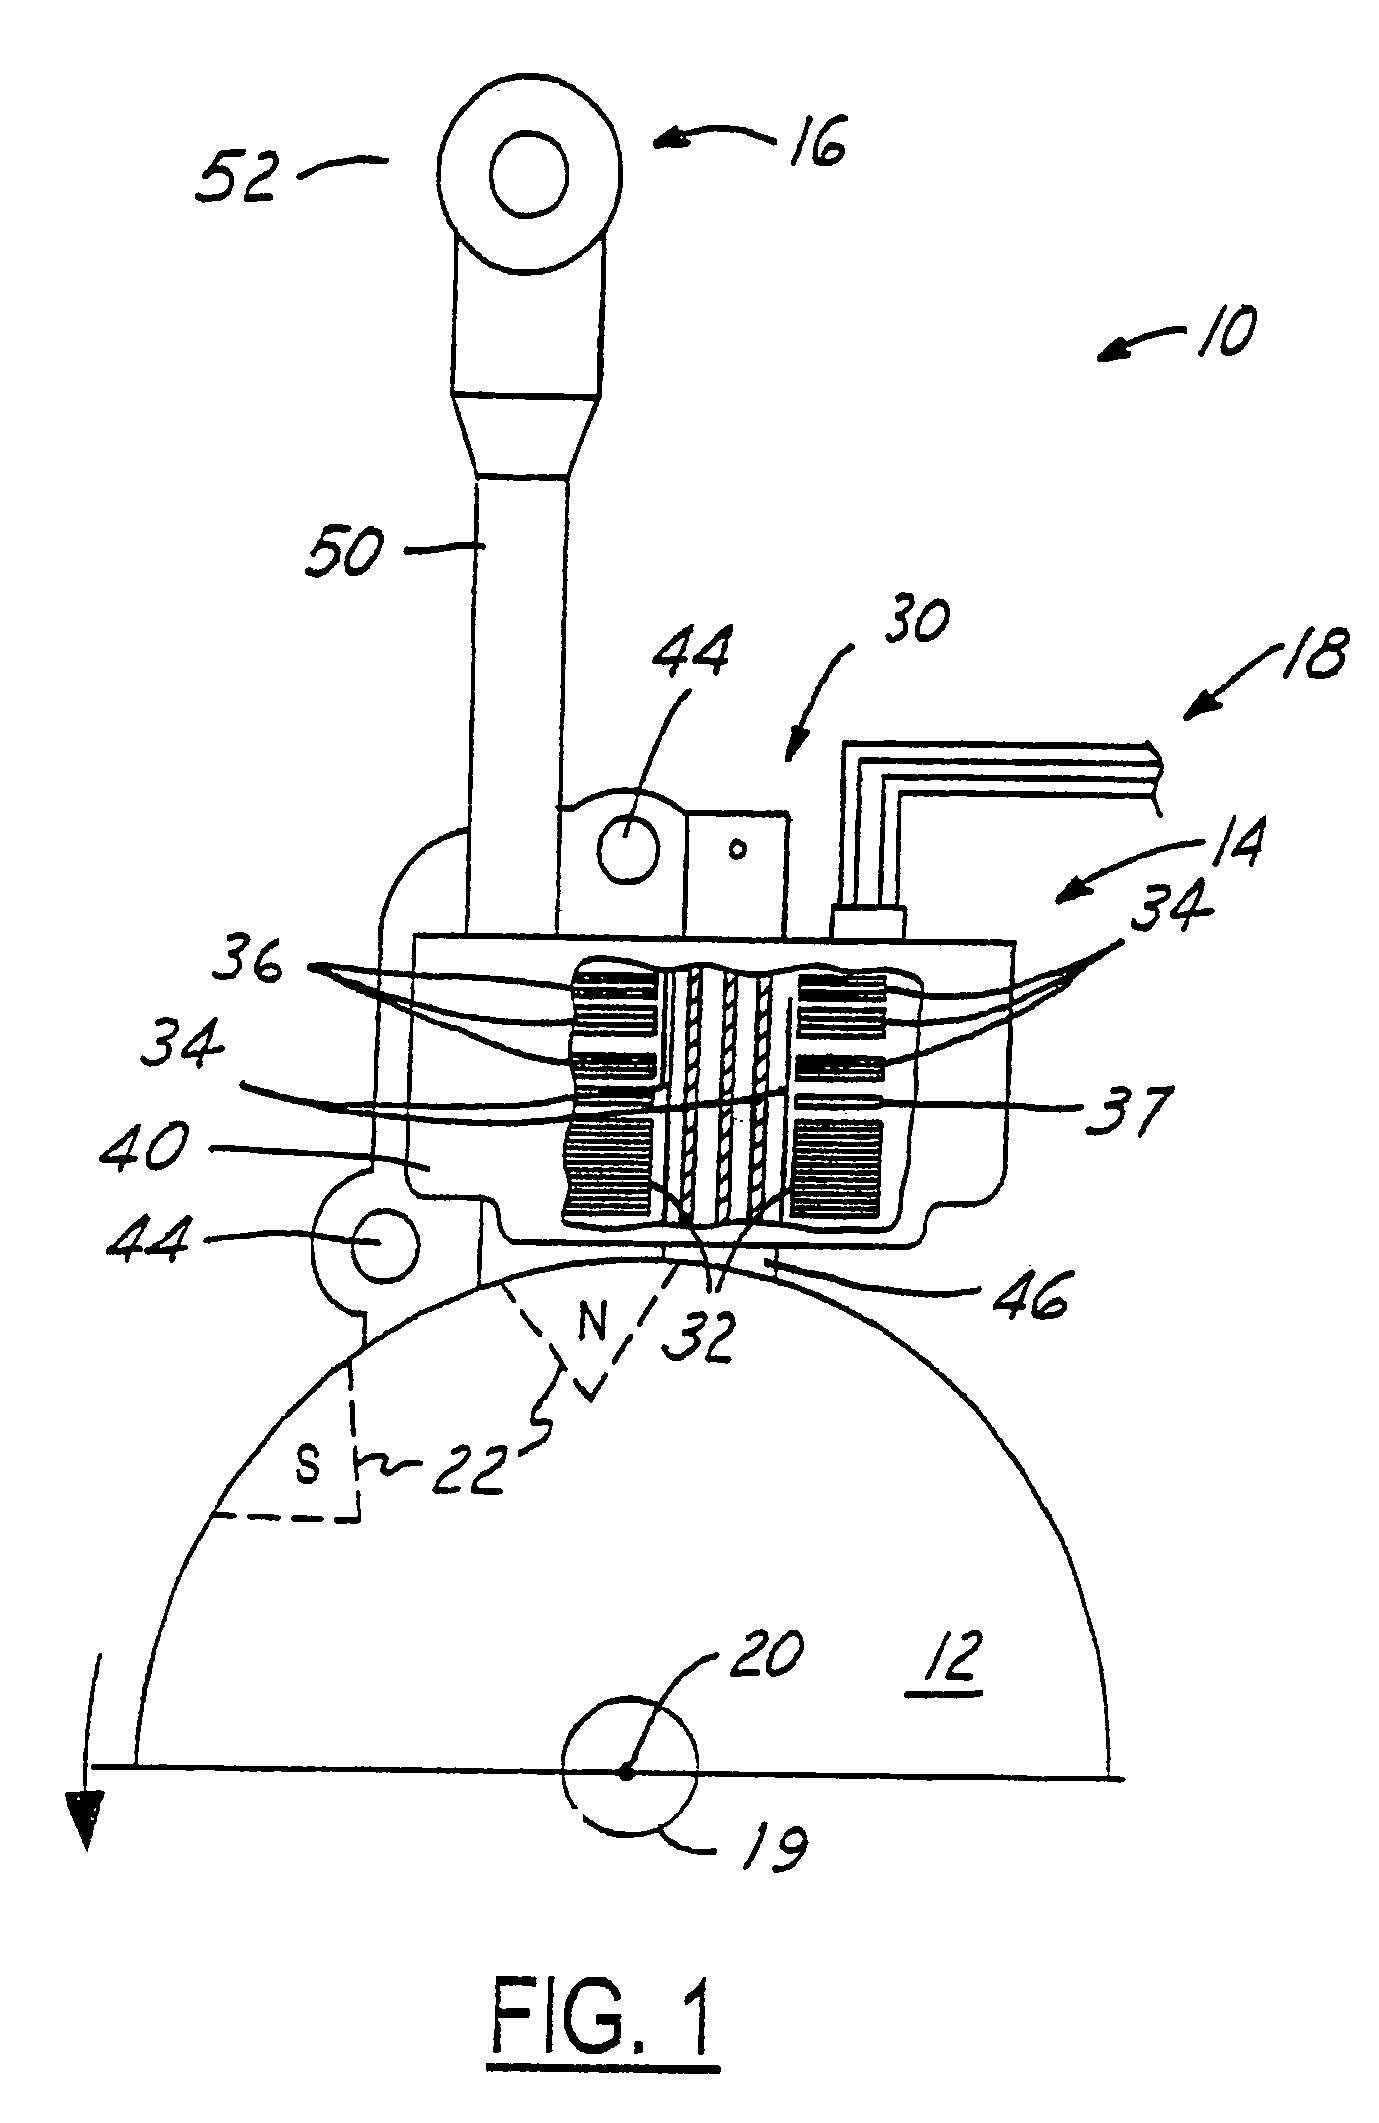 Ignition timing control system for light duty combustion engines